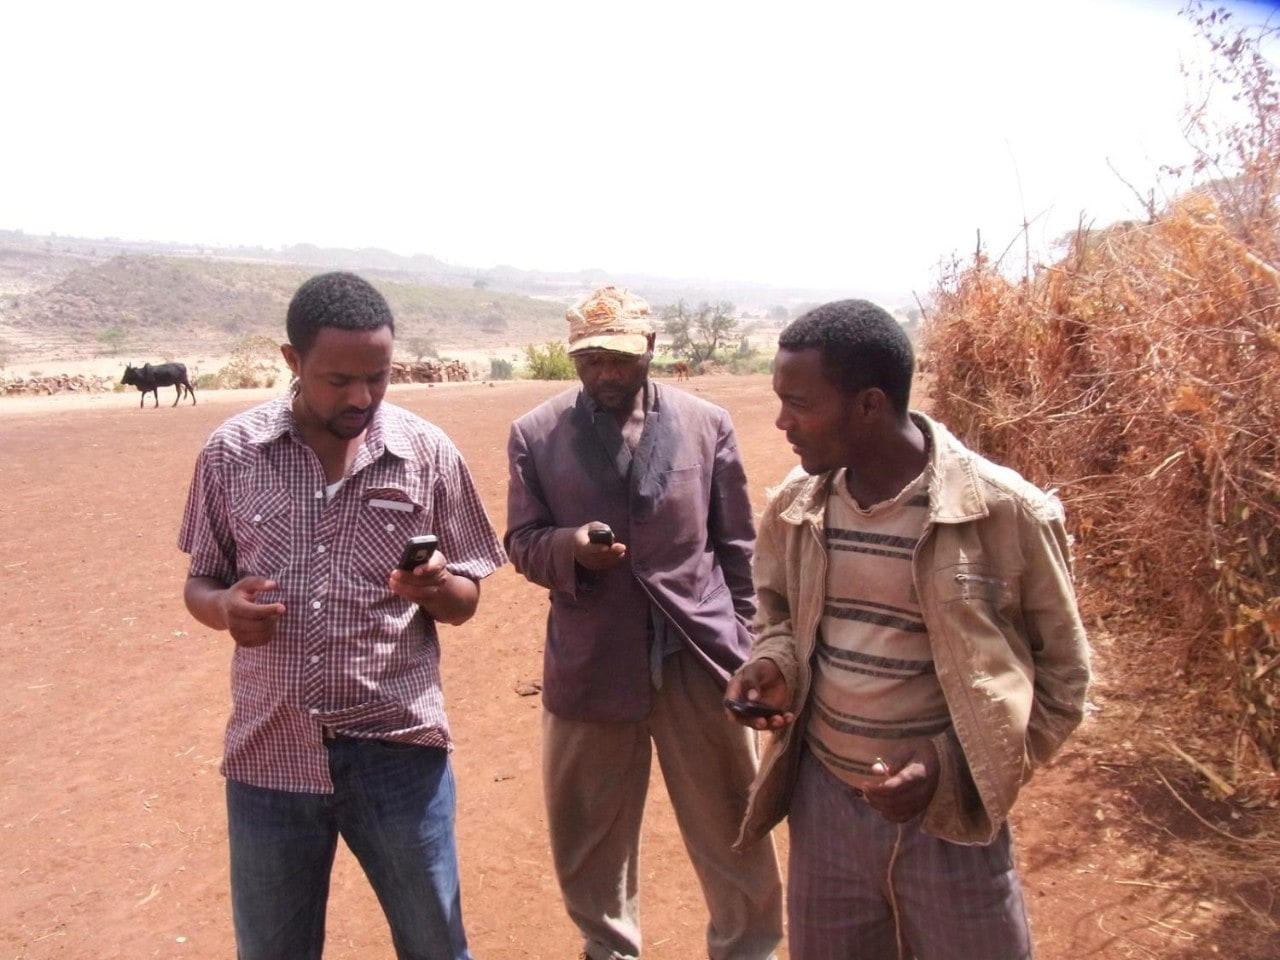 Ethiopian farmers exchange phone numbers with a research assistant. Photo: Petr Matous.